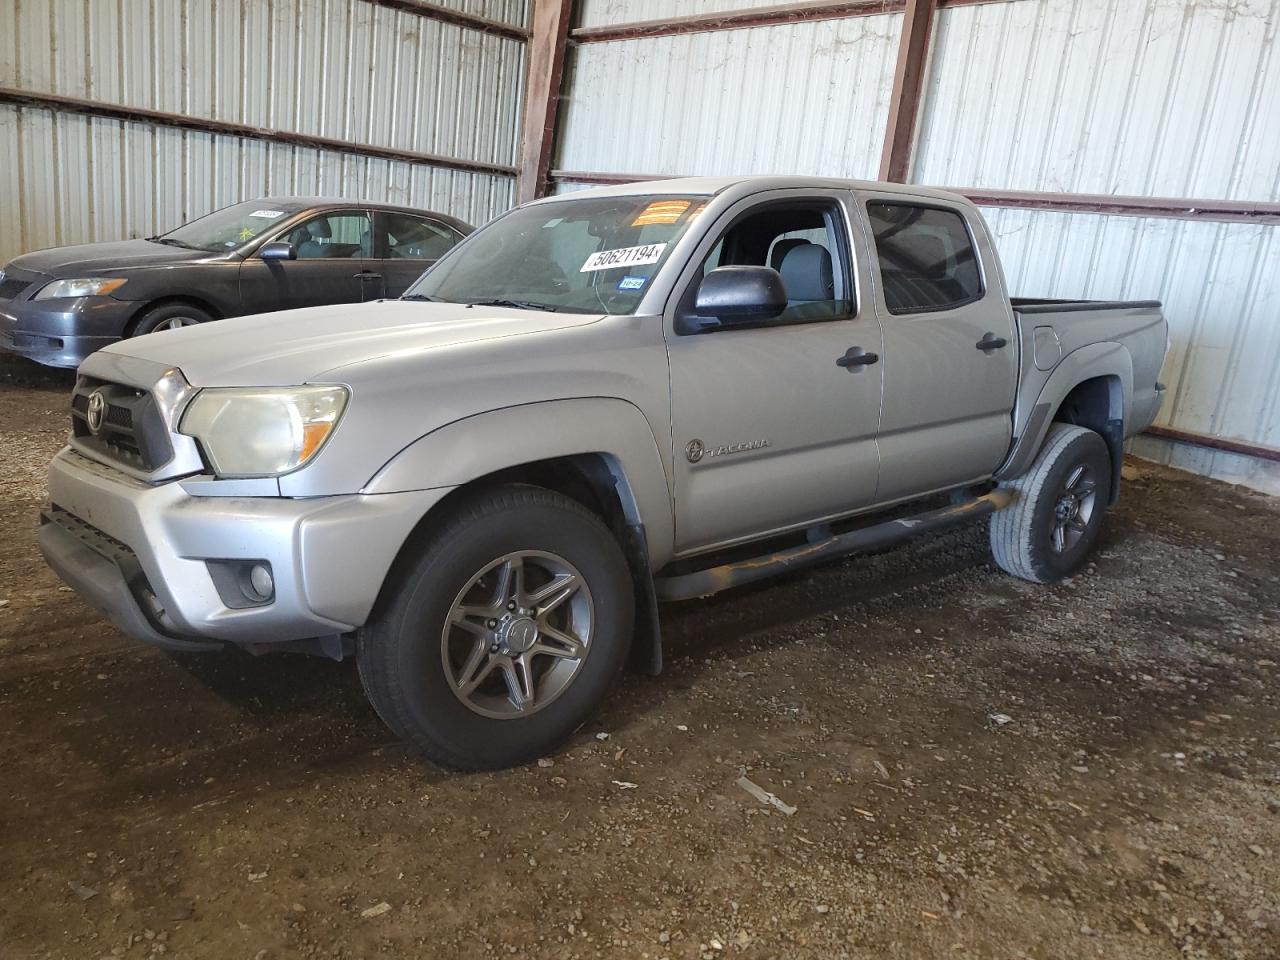 vin: 5TFJU4GN1DX029893 5TFJU4GN1DX029893 2013 toyota tacoma 4000 for Sale in 77049 1968, Tx - Houston East, Houston, Texas, USA